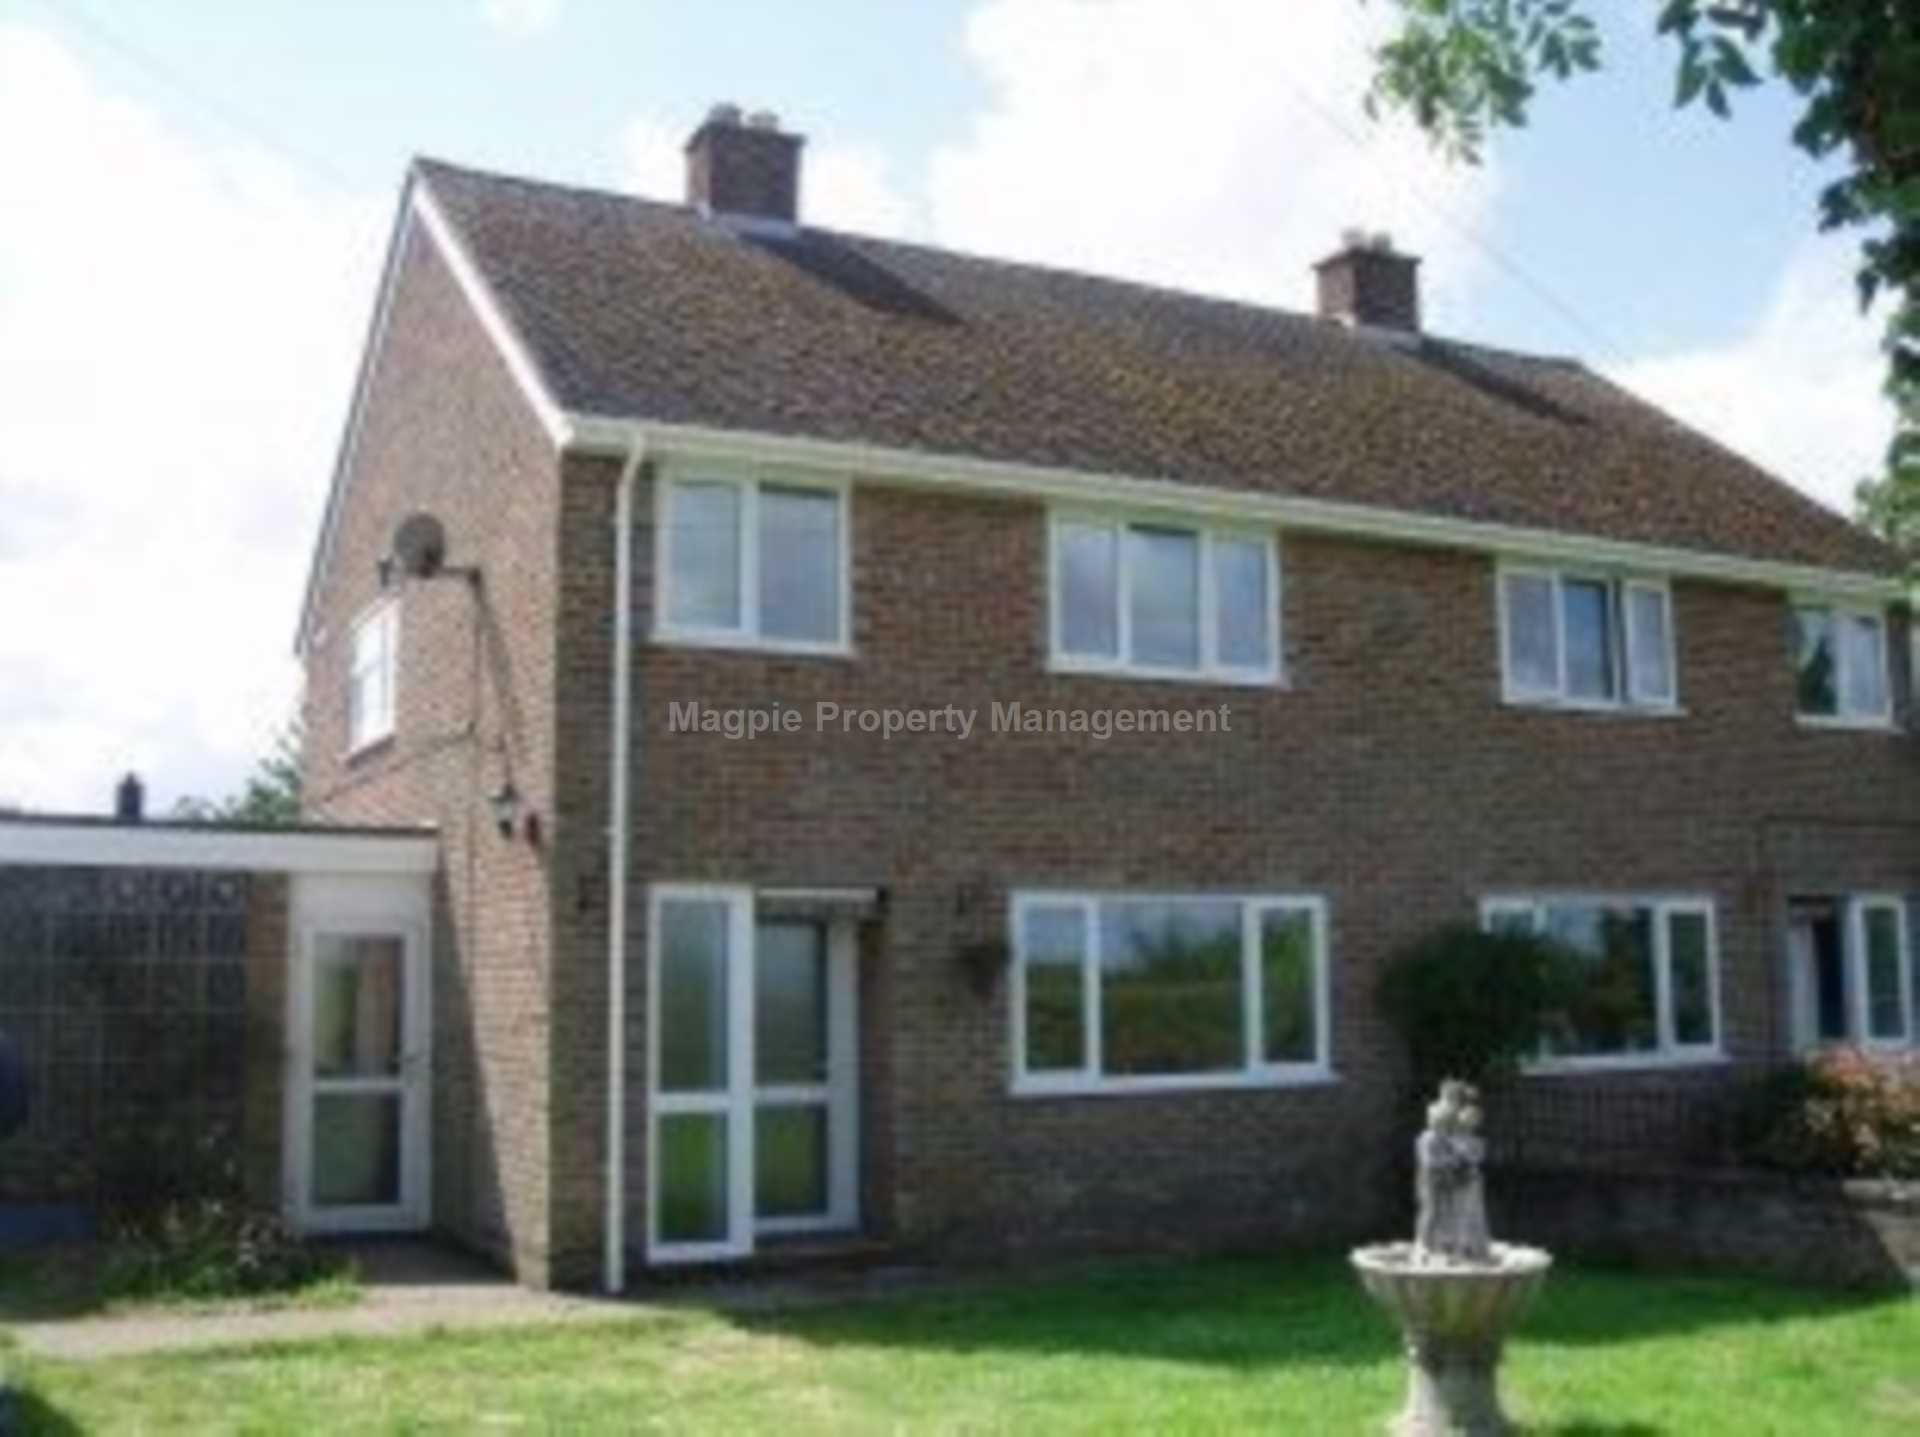 3 bed Semi-Detached House for rent in Huntingdon. From Magpie Property Management - St Neots